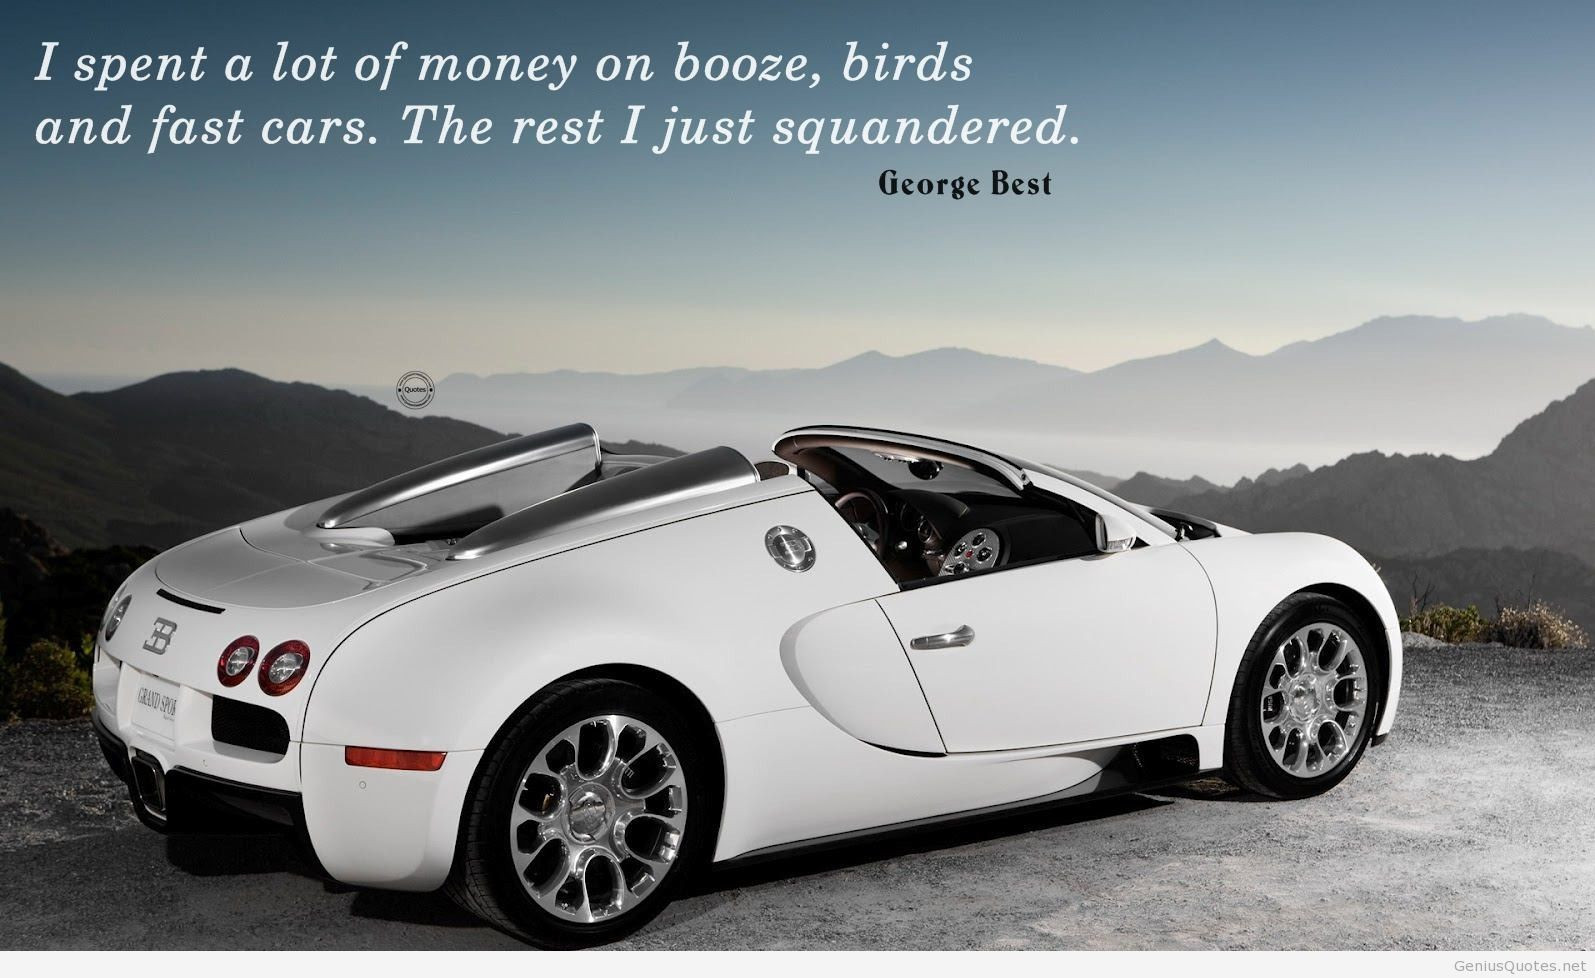 Luxury Cars With Motivational Quotes Images
 Motivational Quotes on car Google Search